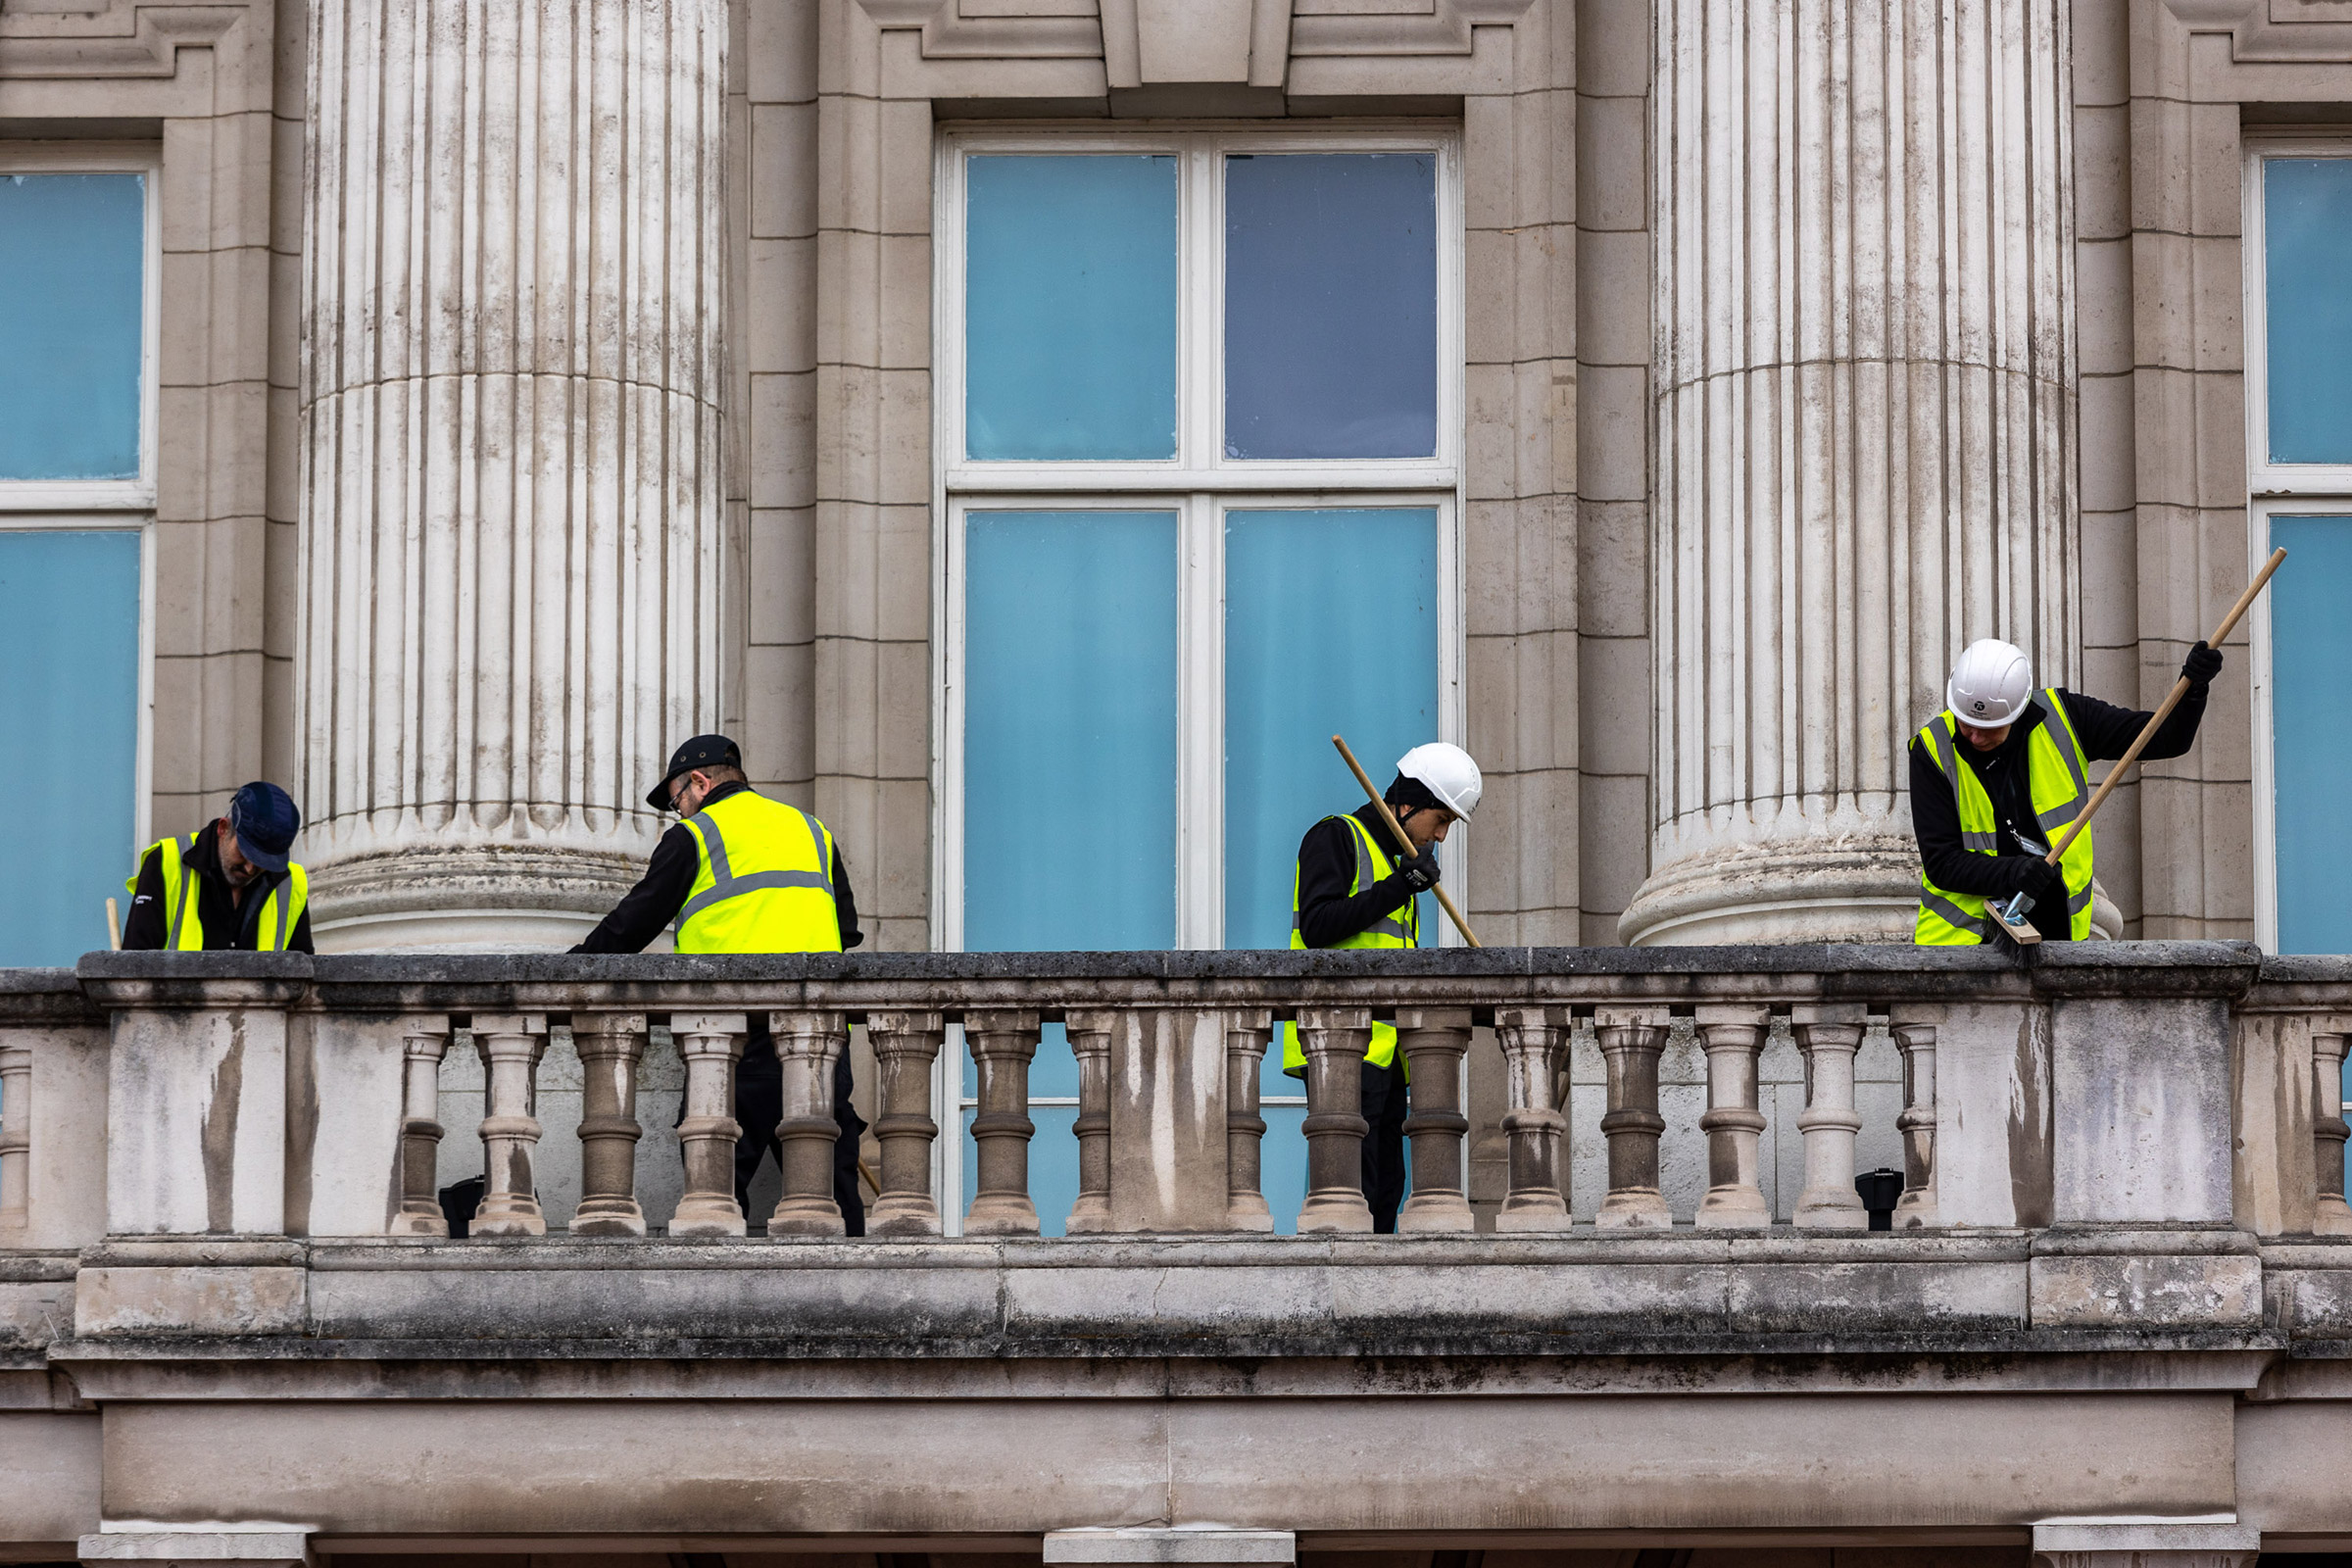 The balcony at Buckingham Palace balcony is cleaned ahead of the coronation, on April 18. (Marcin Nowak—Shutterstock)